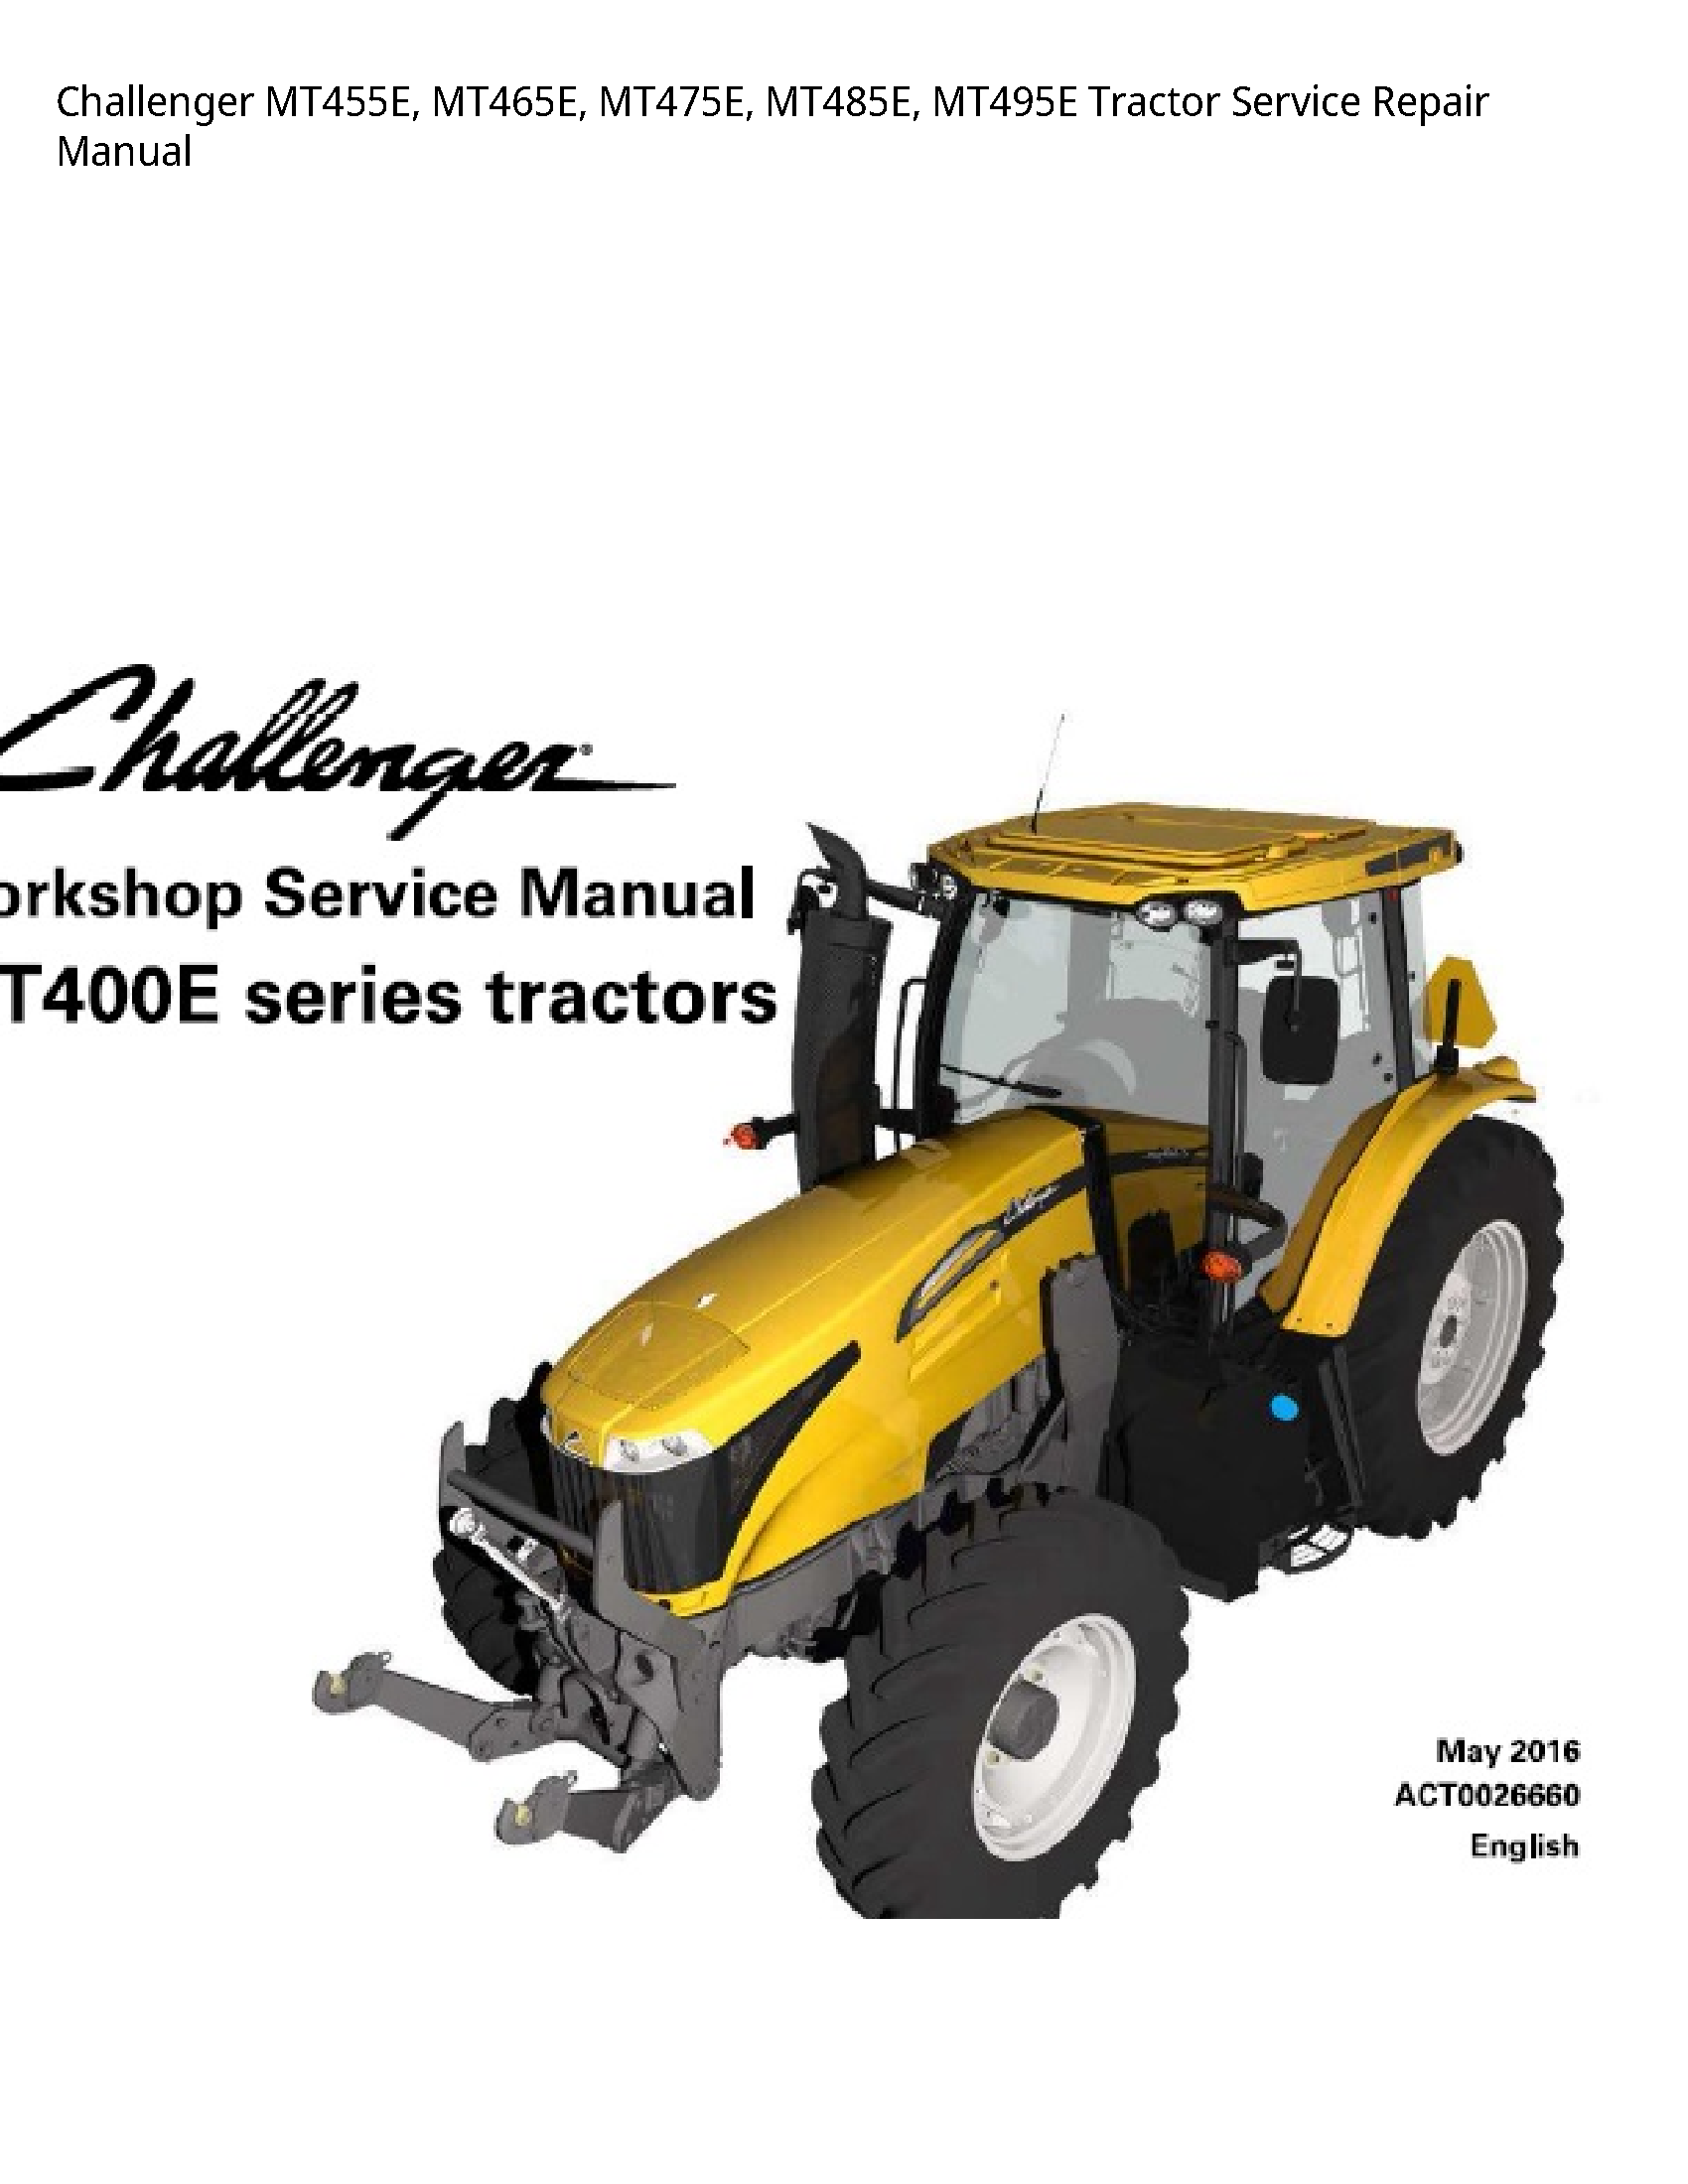 Challenger MT455E Tractor manual